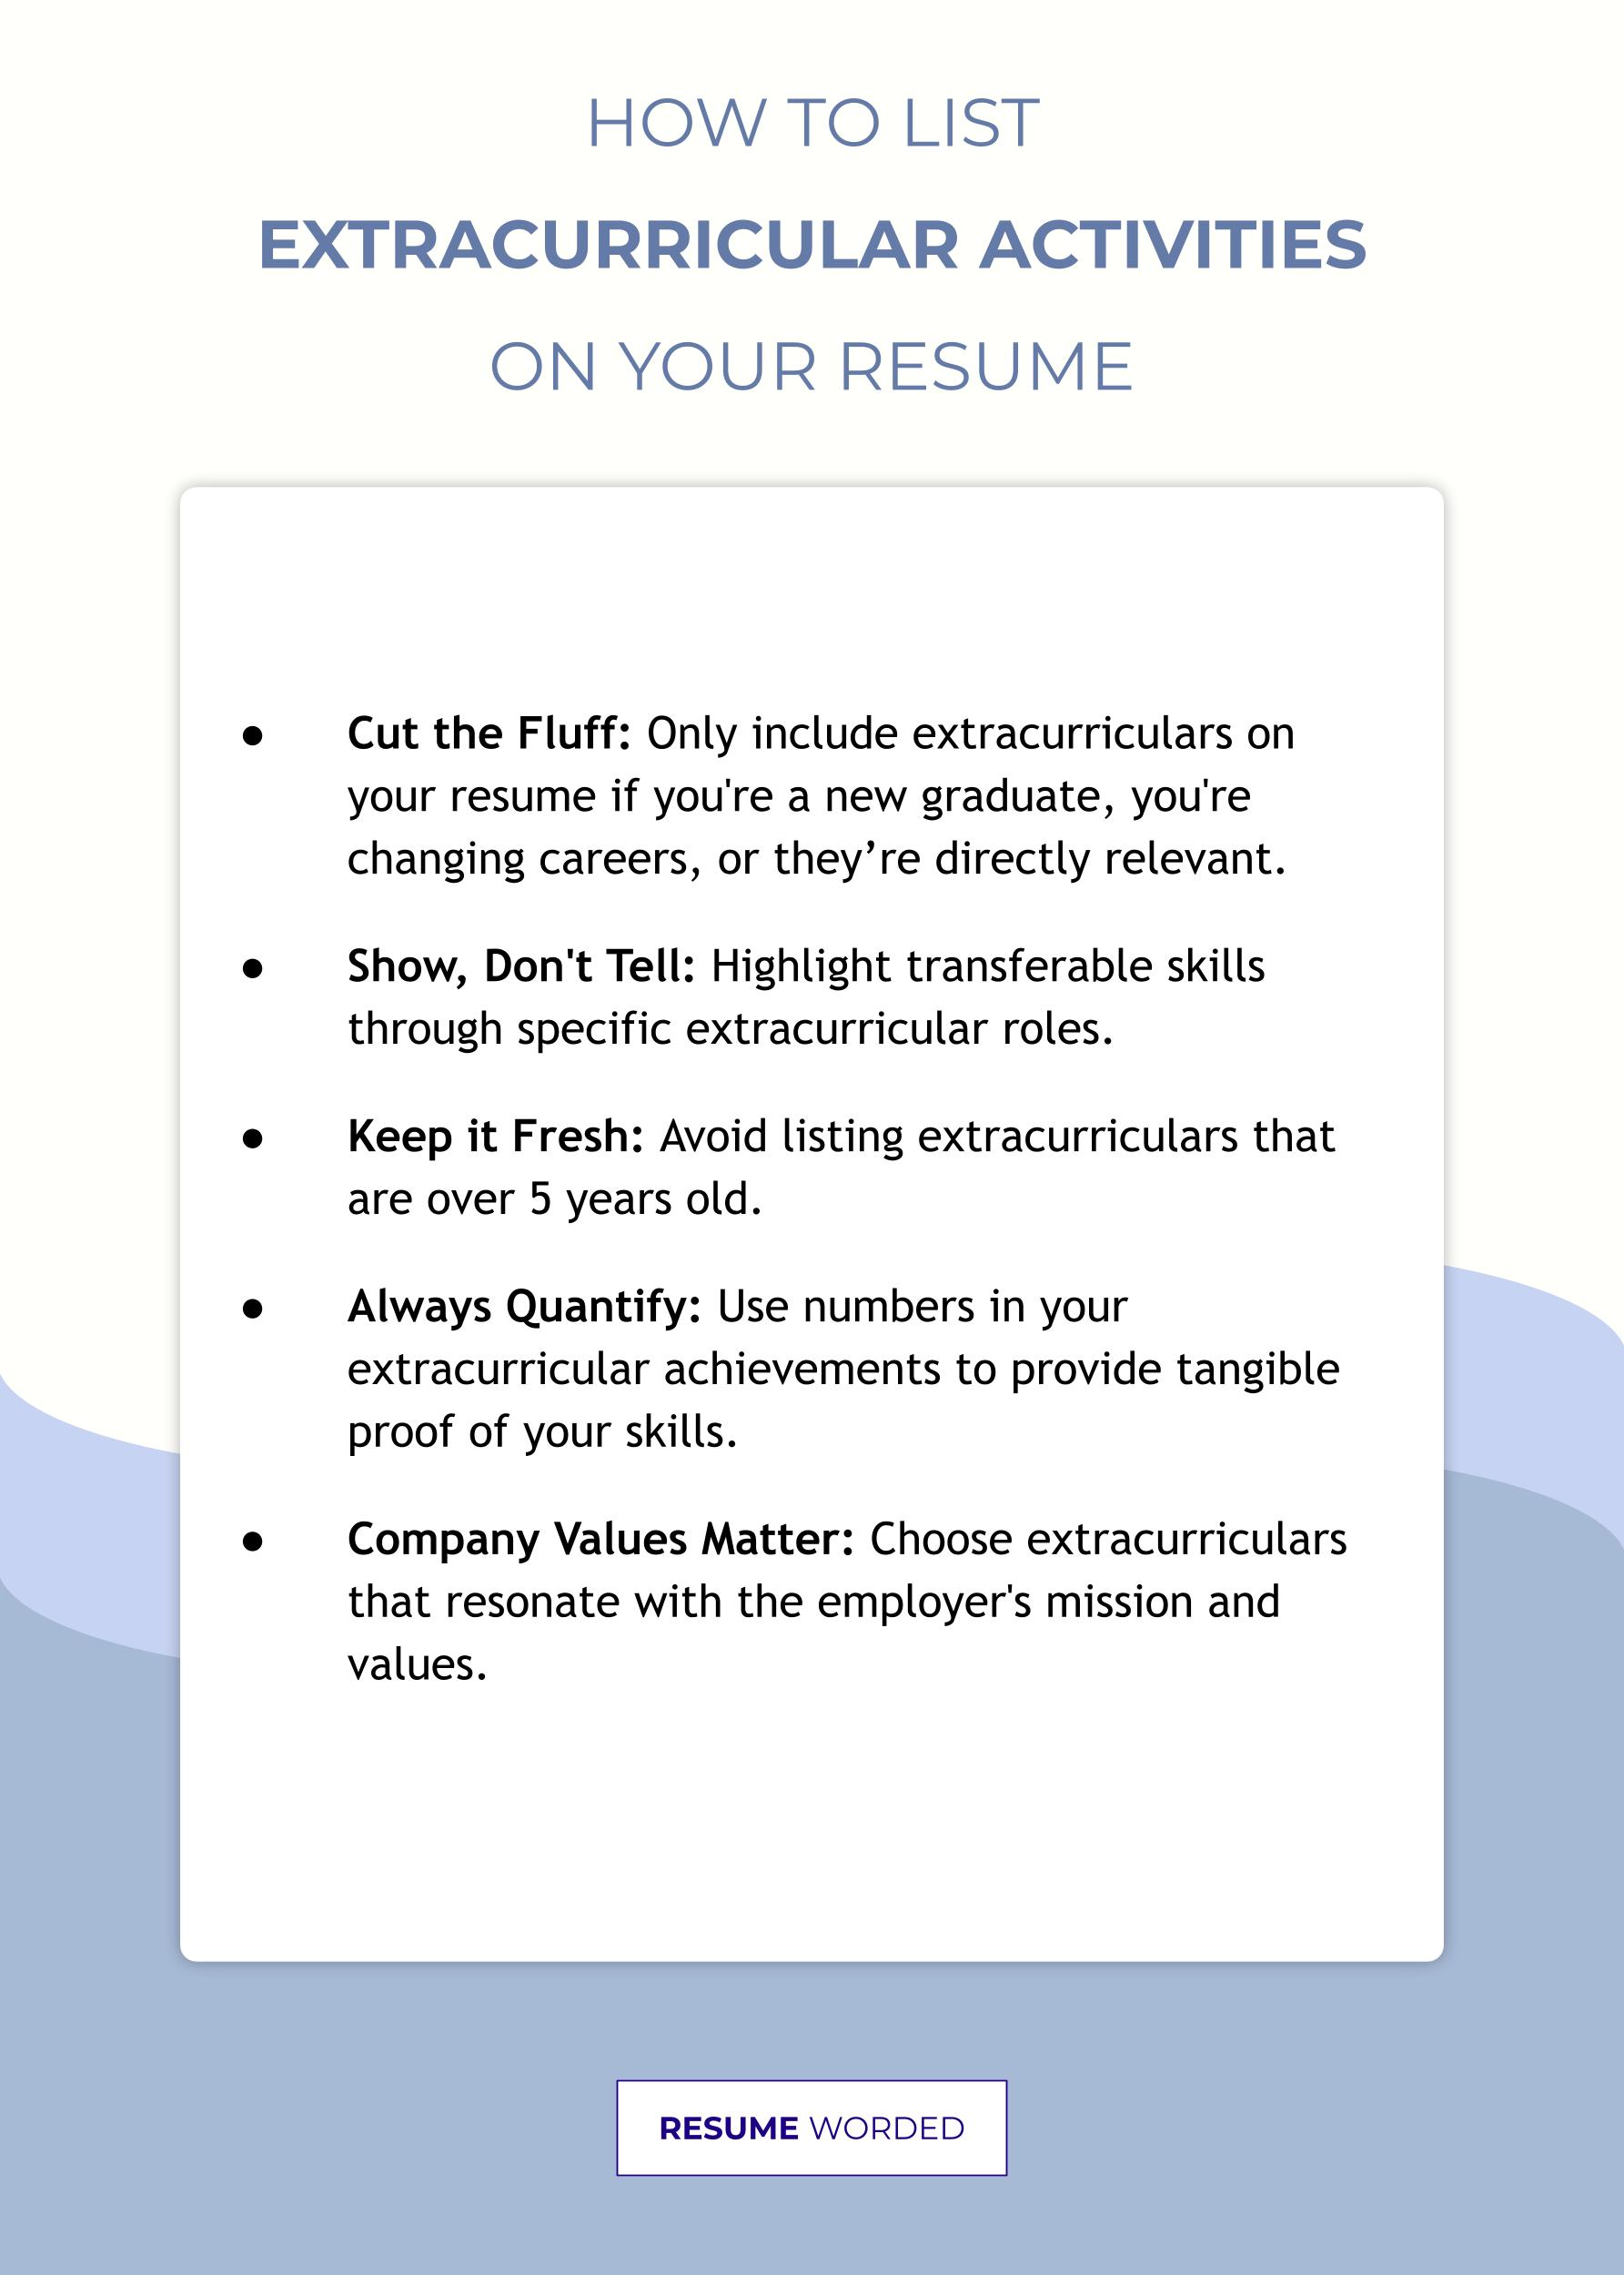 Copy of Infographic Template - Resume Worded (4).jpg